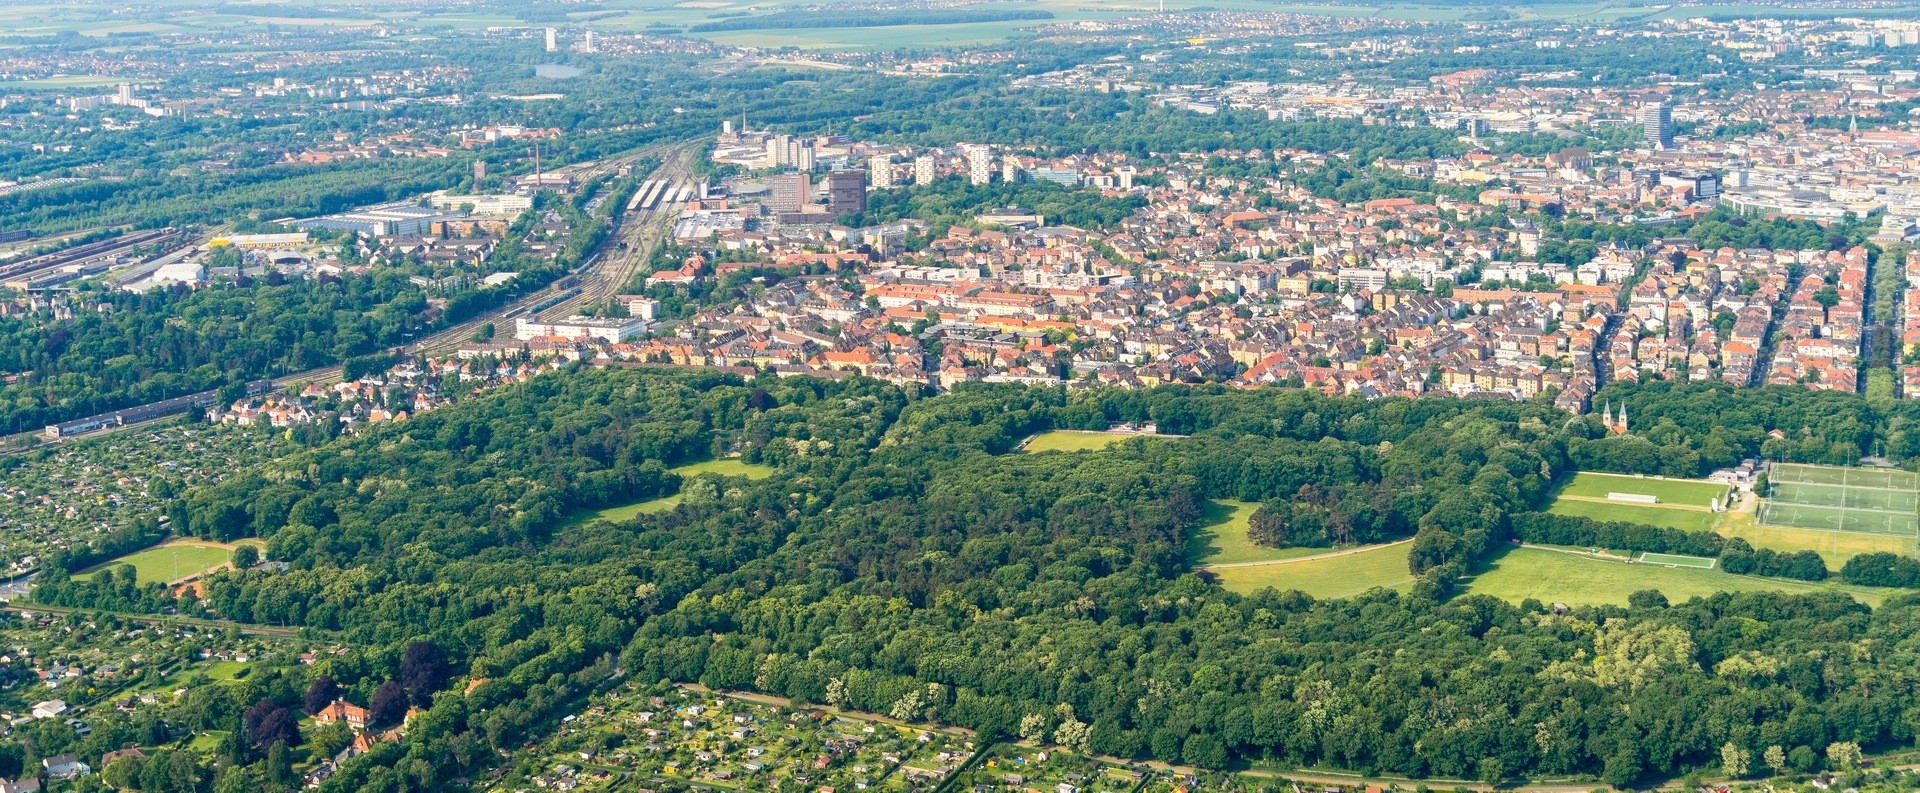 Braunschweig, Germany Private Jet and Air Charter Flights